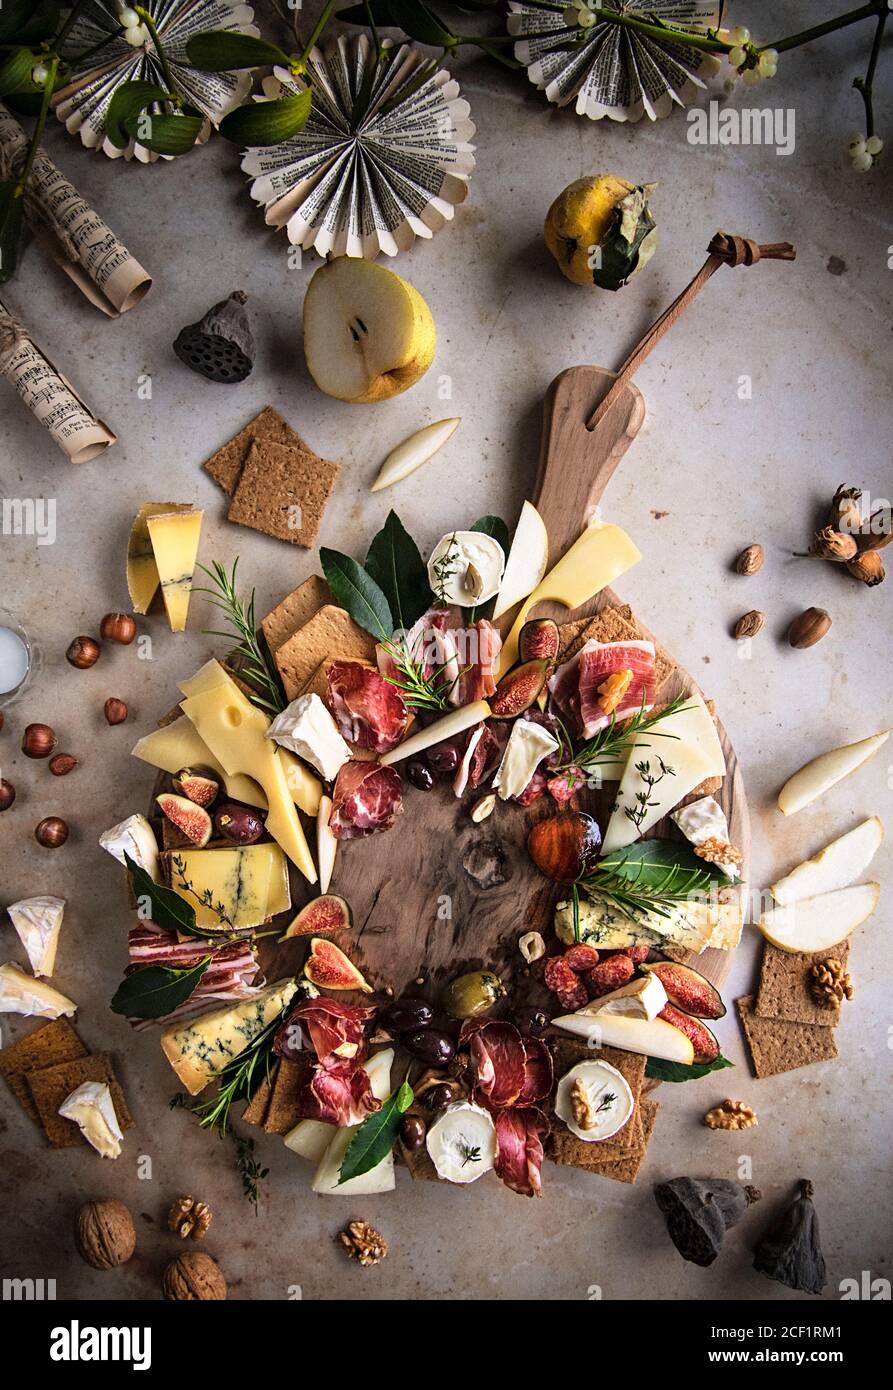 Festive charcuterie and cheeseboard platter Stock Photo